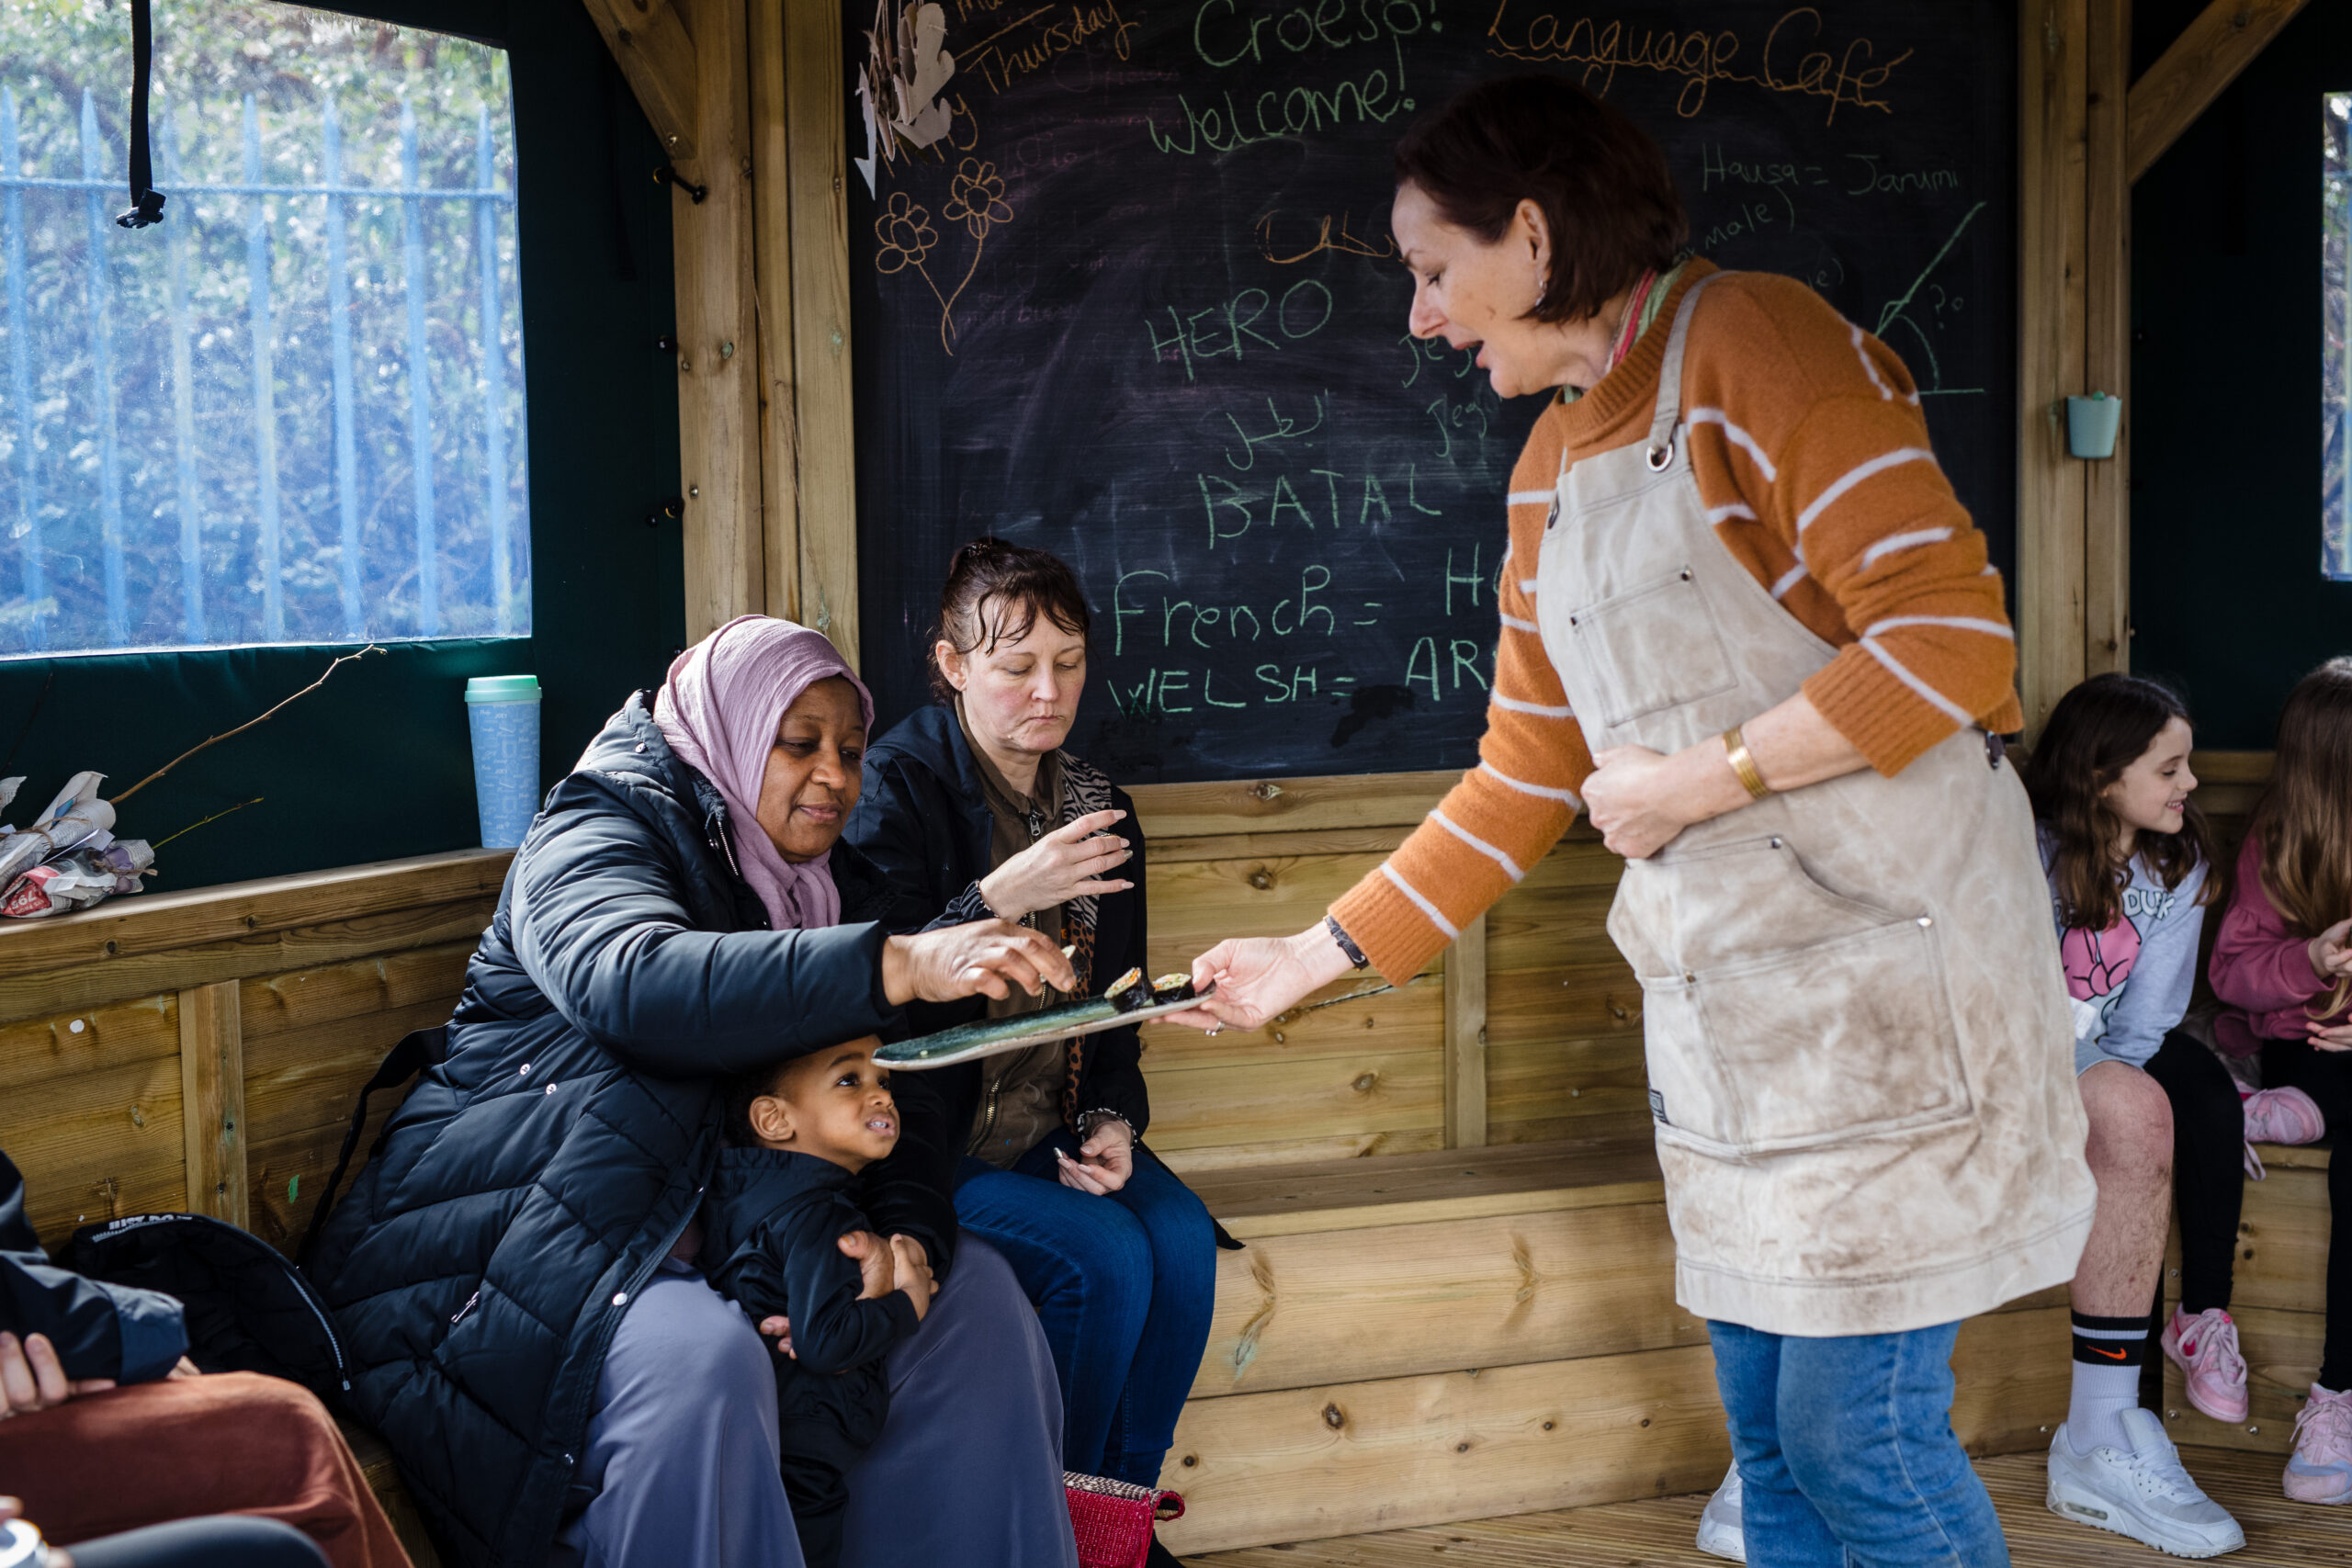 A picture of a white woman with an orange jumper and a beige apron offering food to two other women, who are both sitting down, and a young boy. The woman on the left is wearing a lilac hijab and a black coat and is smiling peacefully. The woman on the right is a white woman with brown hair, wearing a black coat and blue jeans. The young boy is standing between the legs of the woman with a hijab and is looking up at the tray. All are standing in a wooden-panelled room, decorated with a black board.